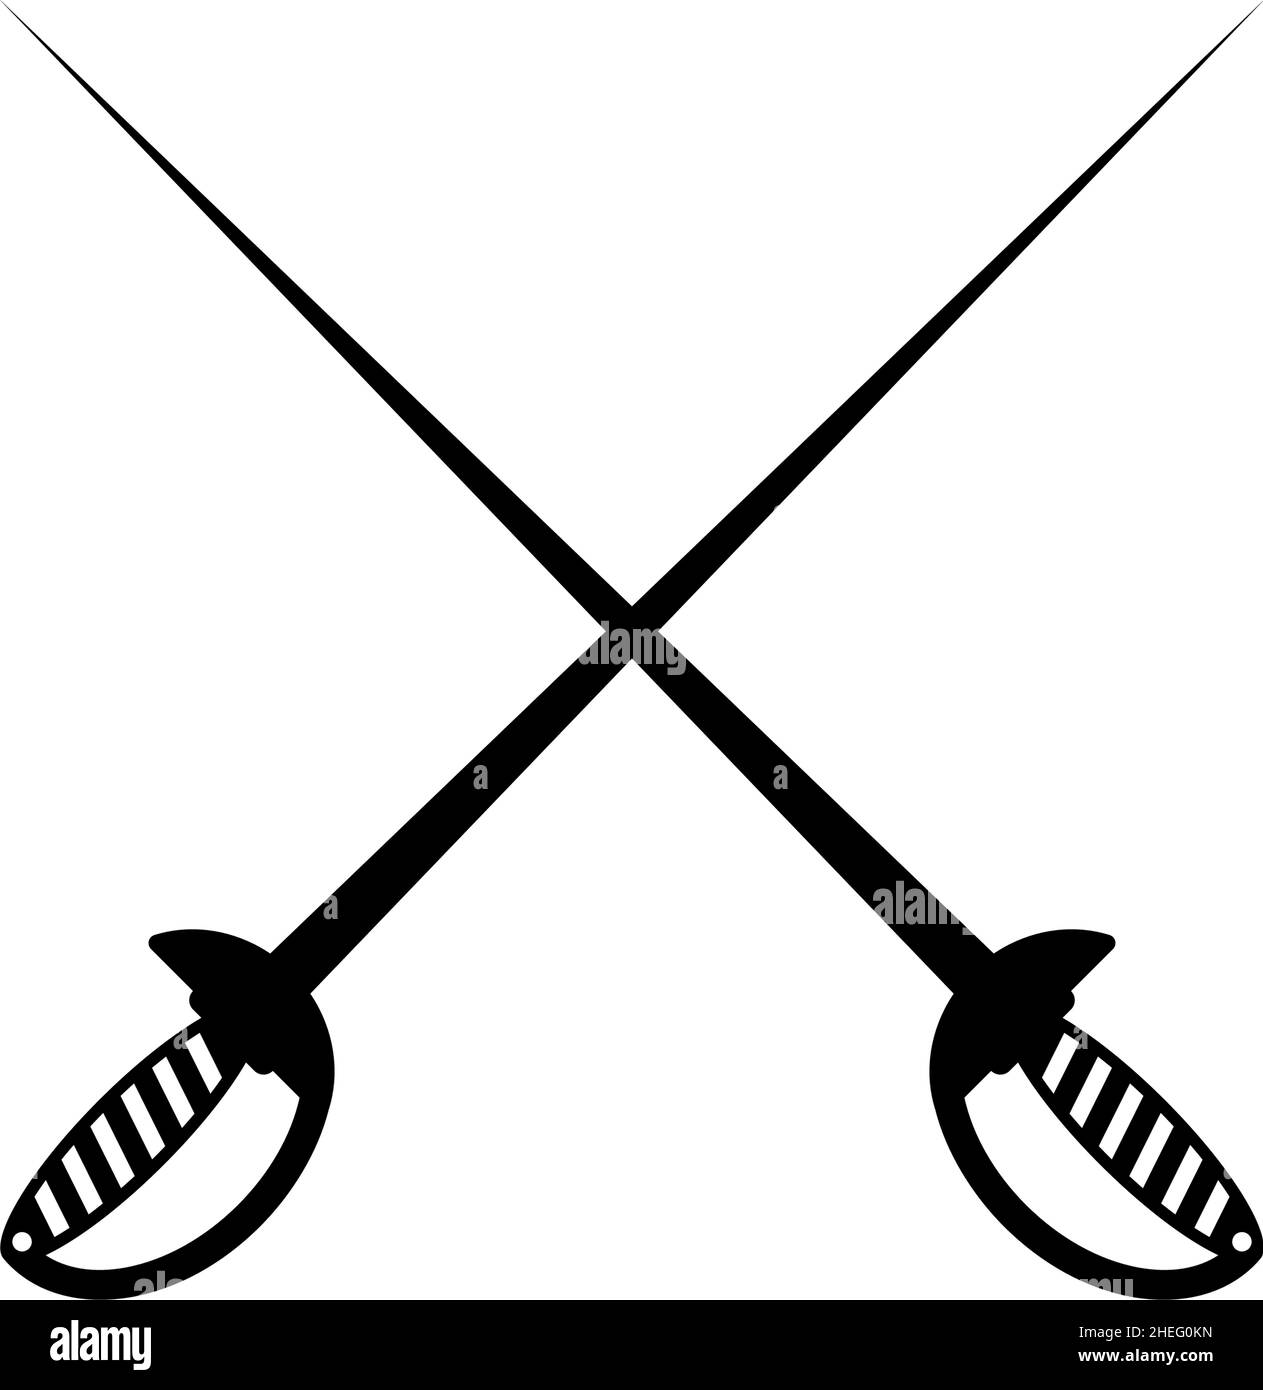 Fencing sword icon design template vector isolated Stock Vector